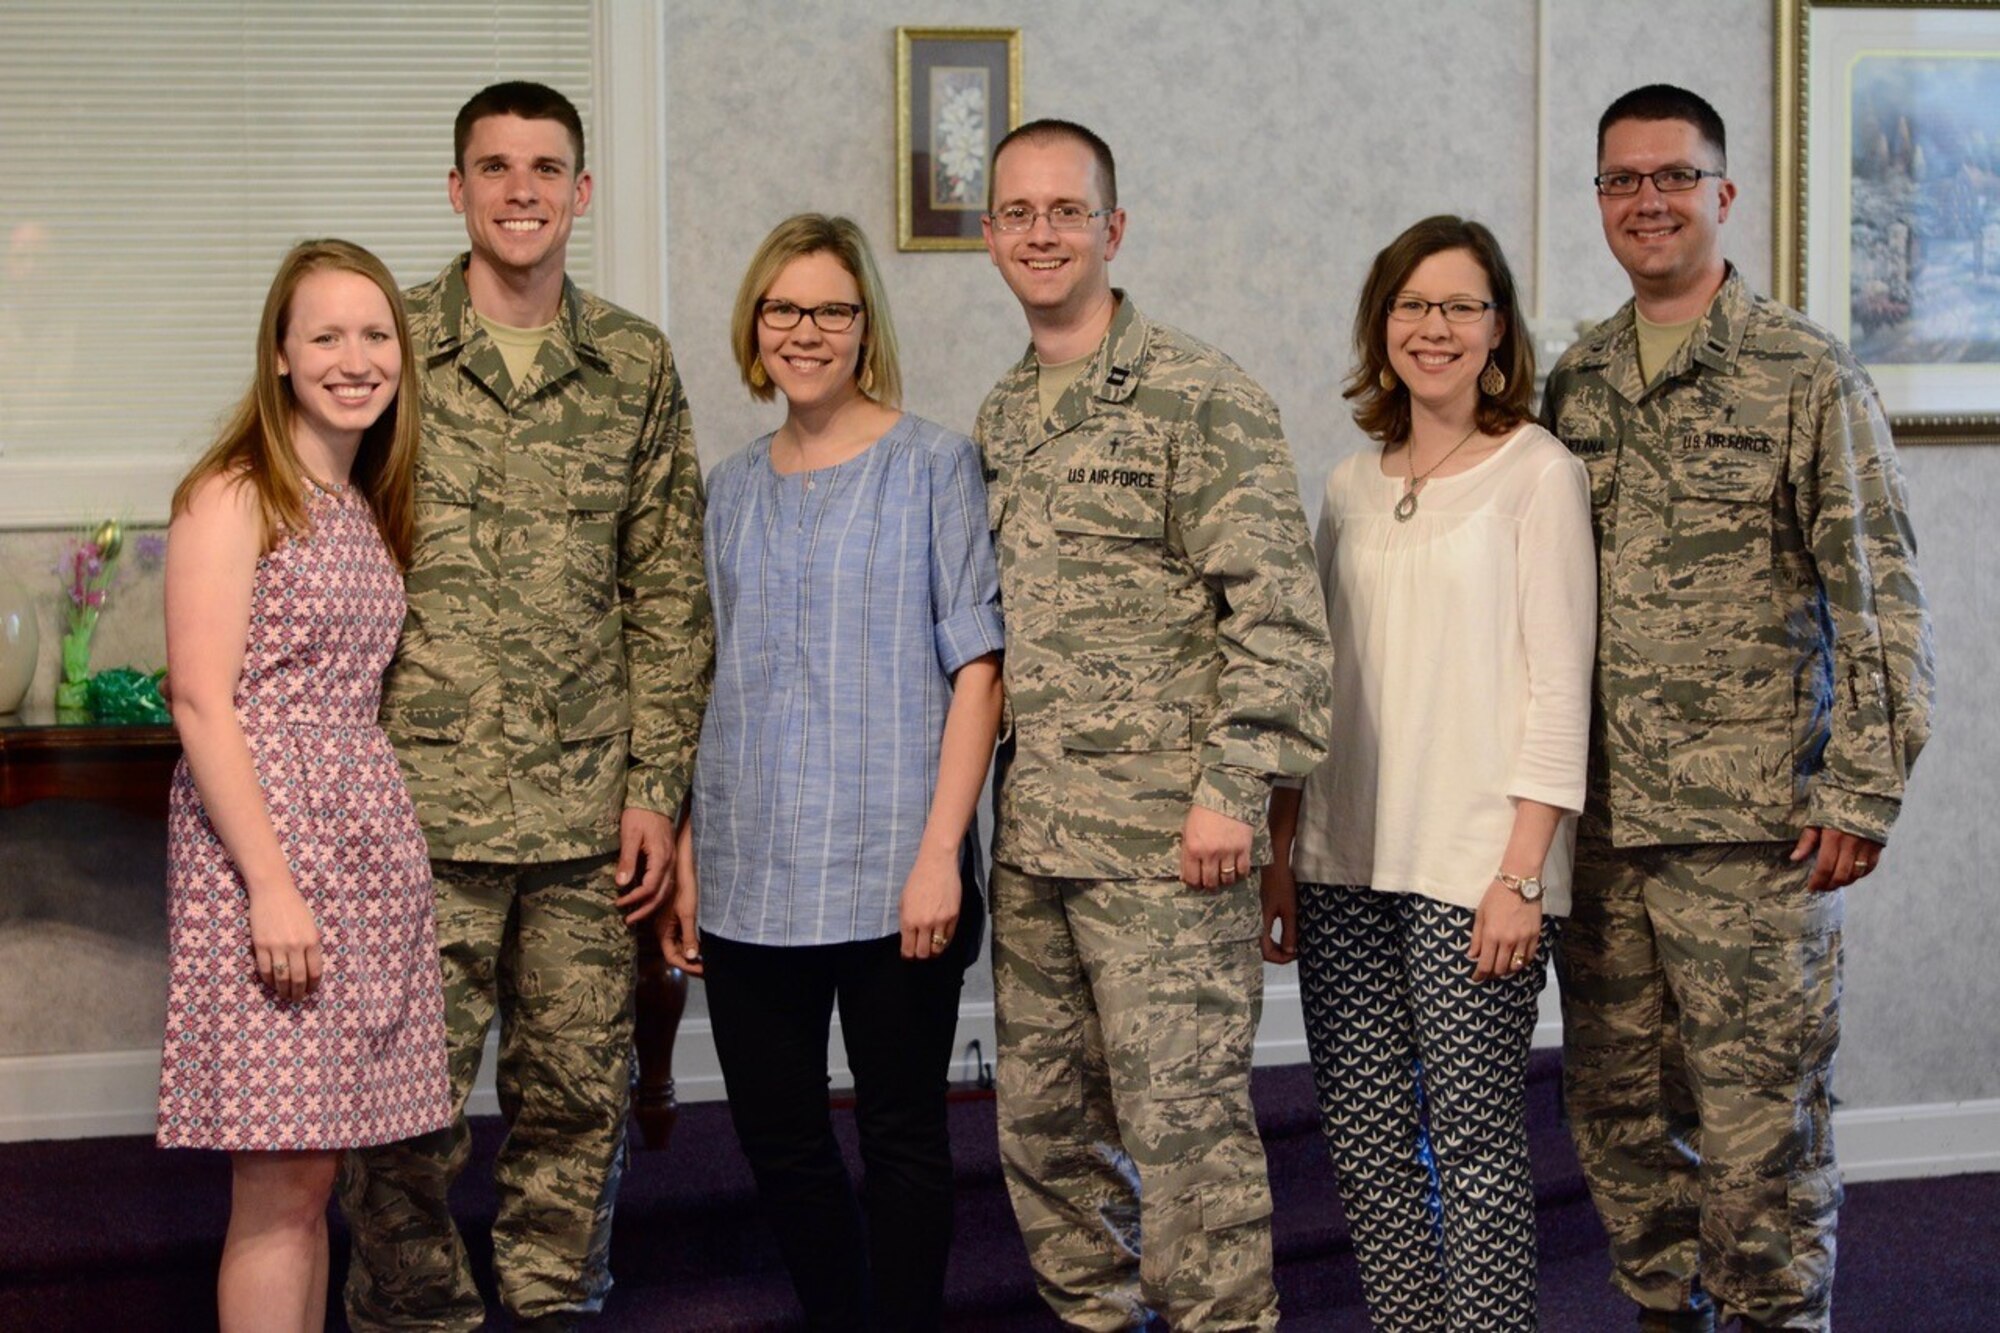 Chaplain (Capt.) Matthew Wilson, 944th Fighter Wing, was the first of the three to join the Air Force Reserve Command six years ago. His wife’s twin sister married Chaplain (1st Lt.) Daniel Smetana, 20th Fighter Wing, Shaw AFB, S.C.